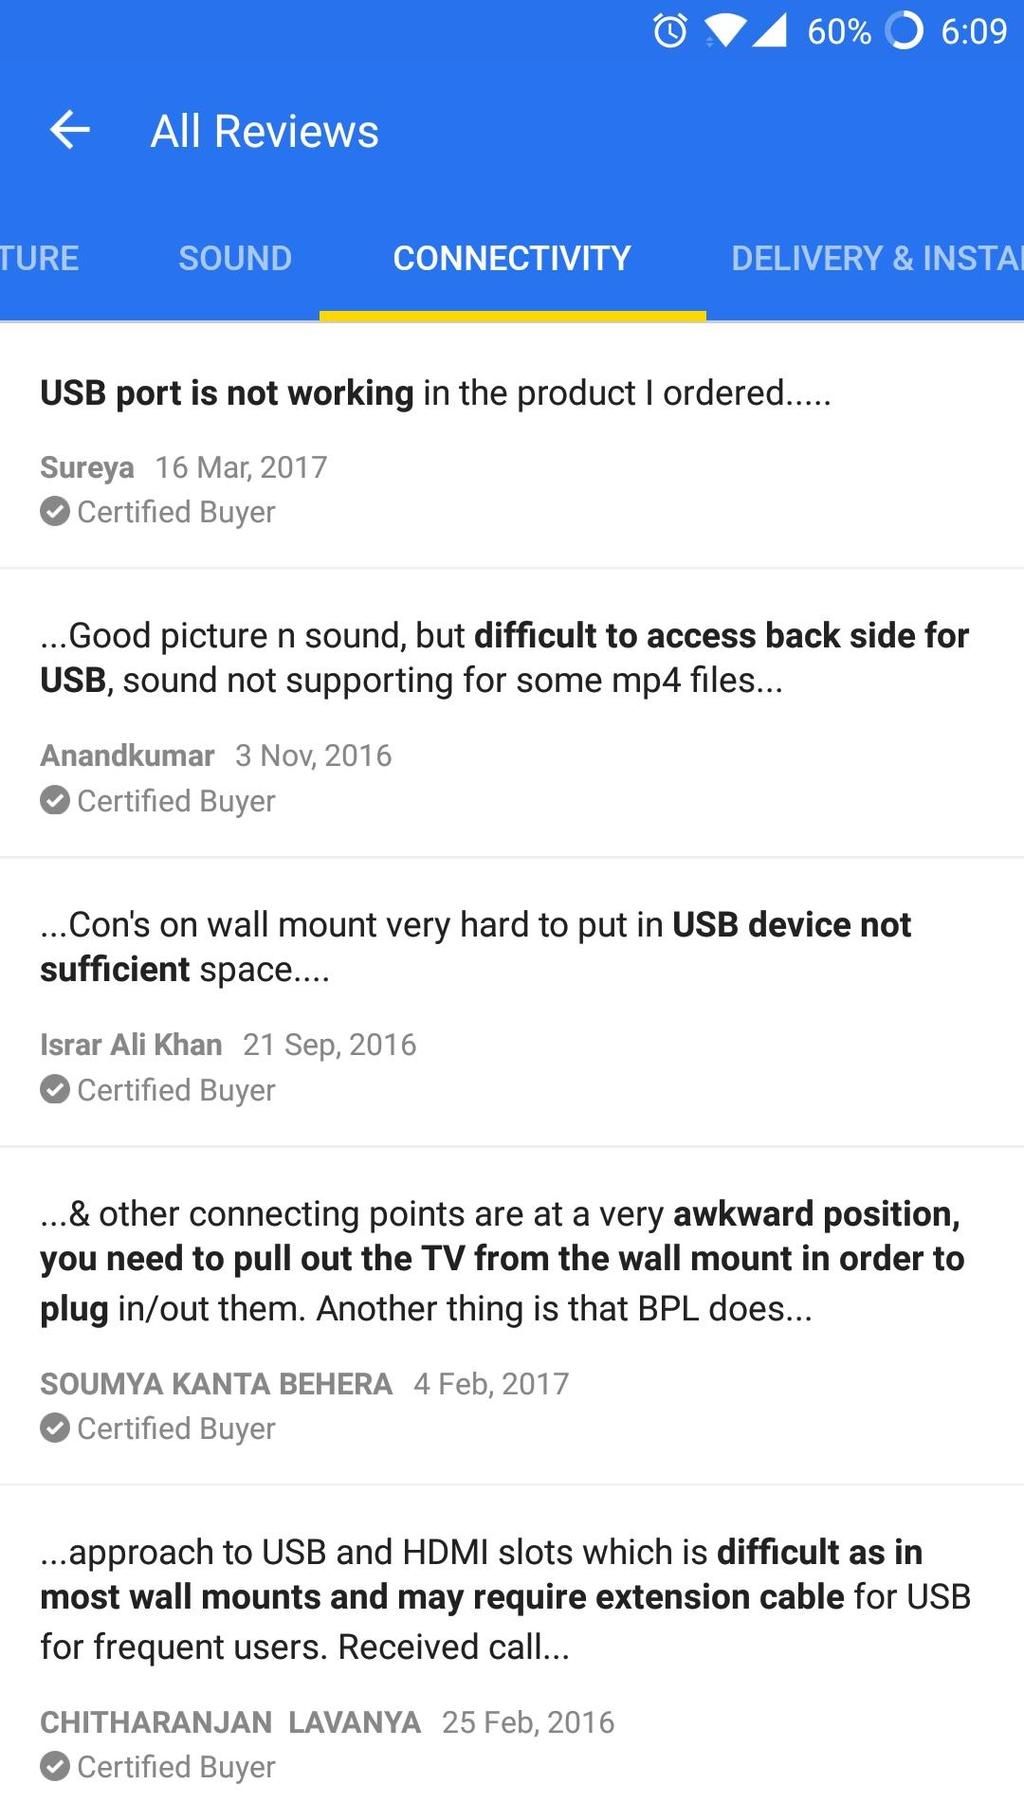 Aspect Reviews, Aggregate Opinion of